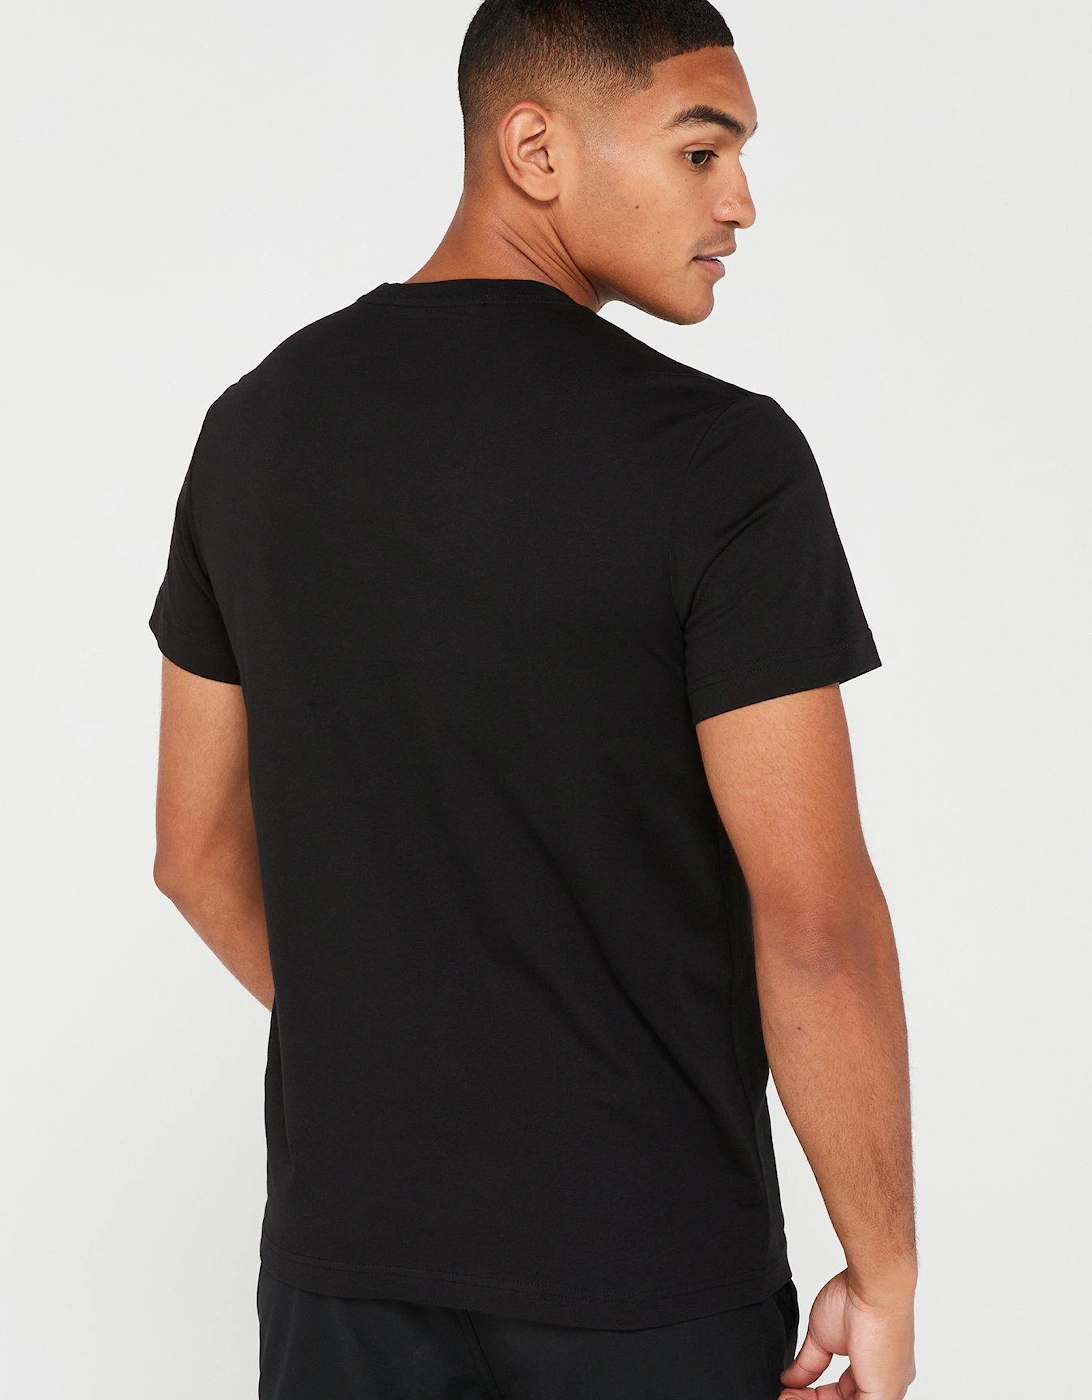 Embroidered Badge T-shirt - Black